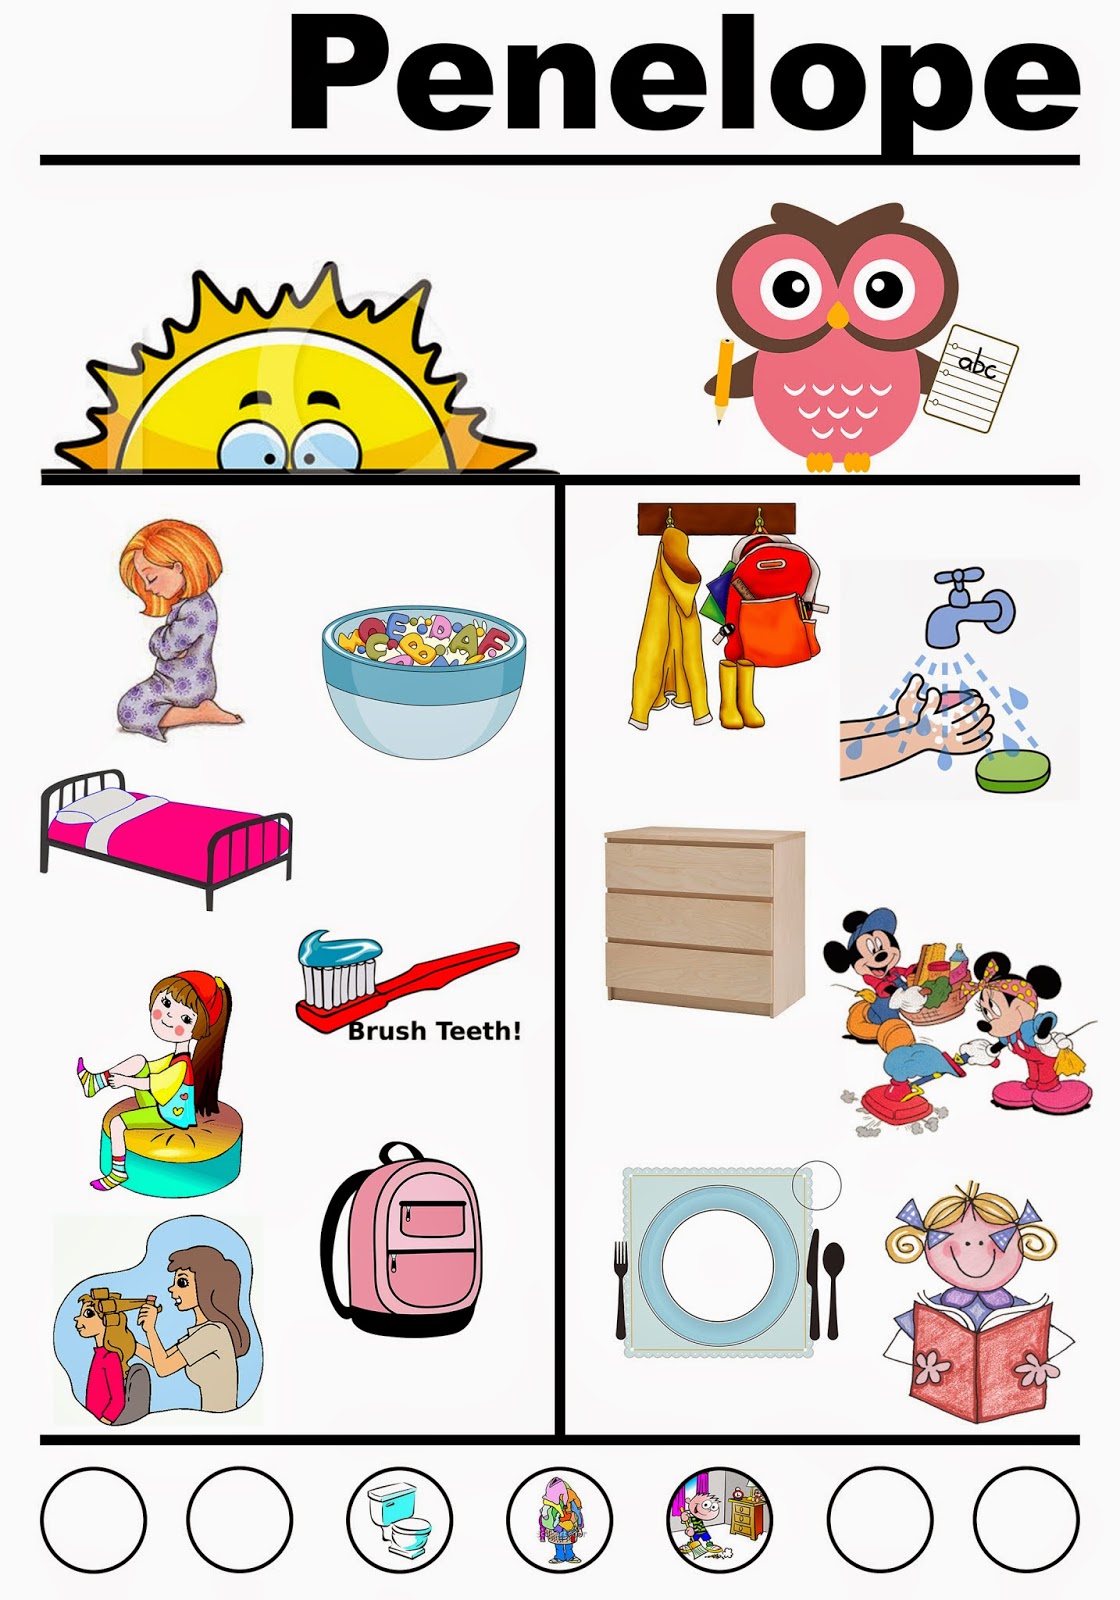 Chores For Kids Clipart.